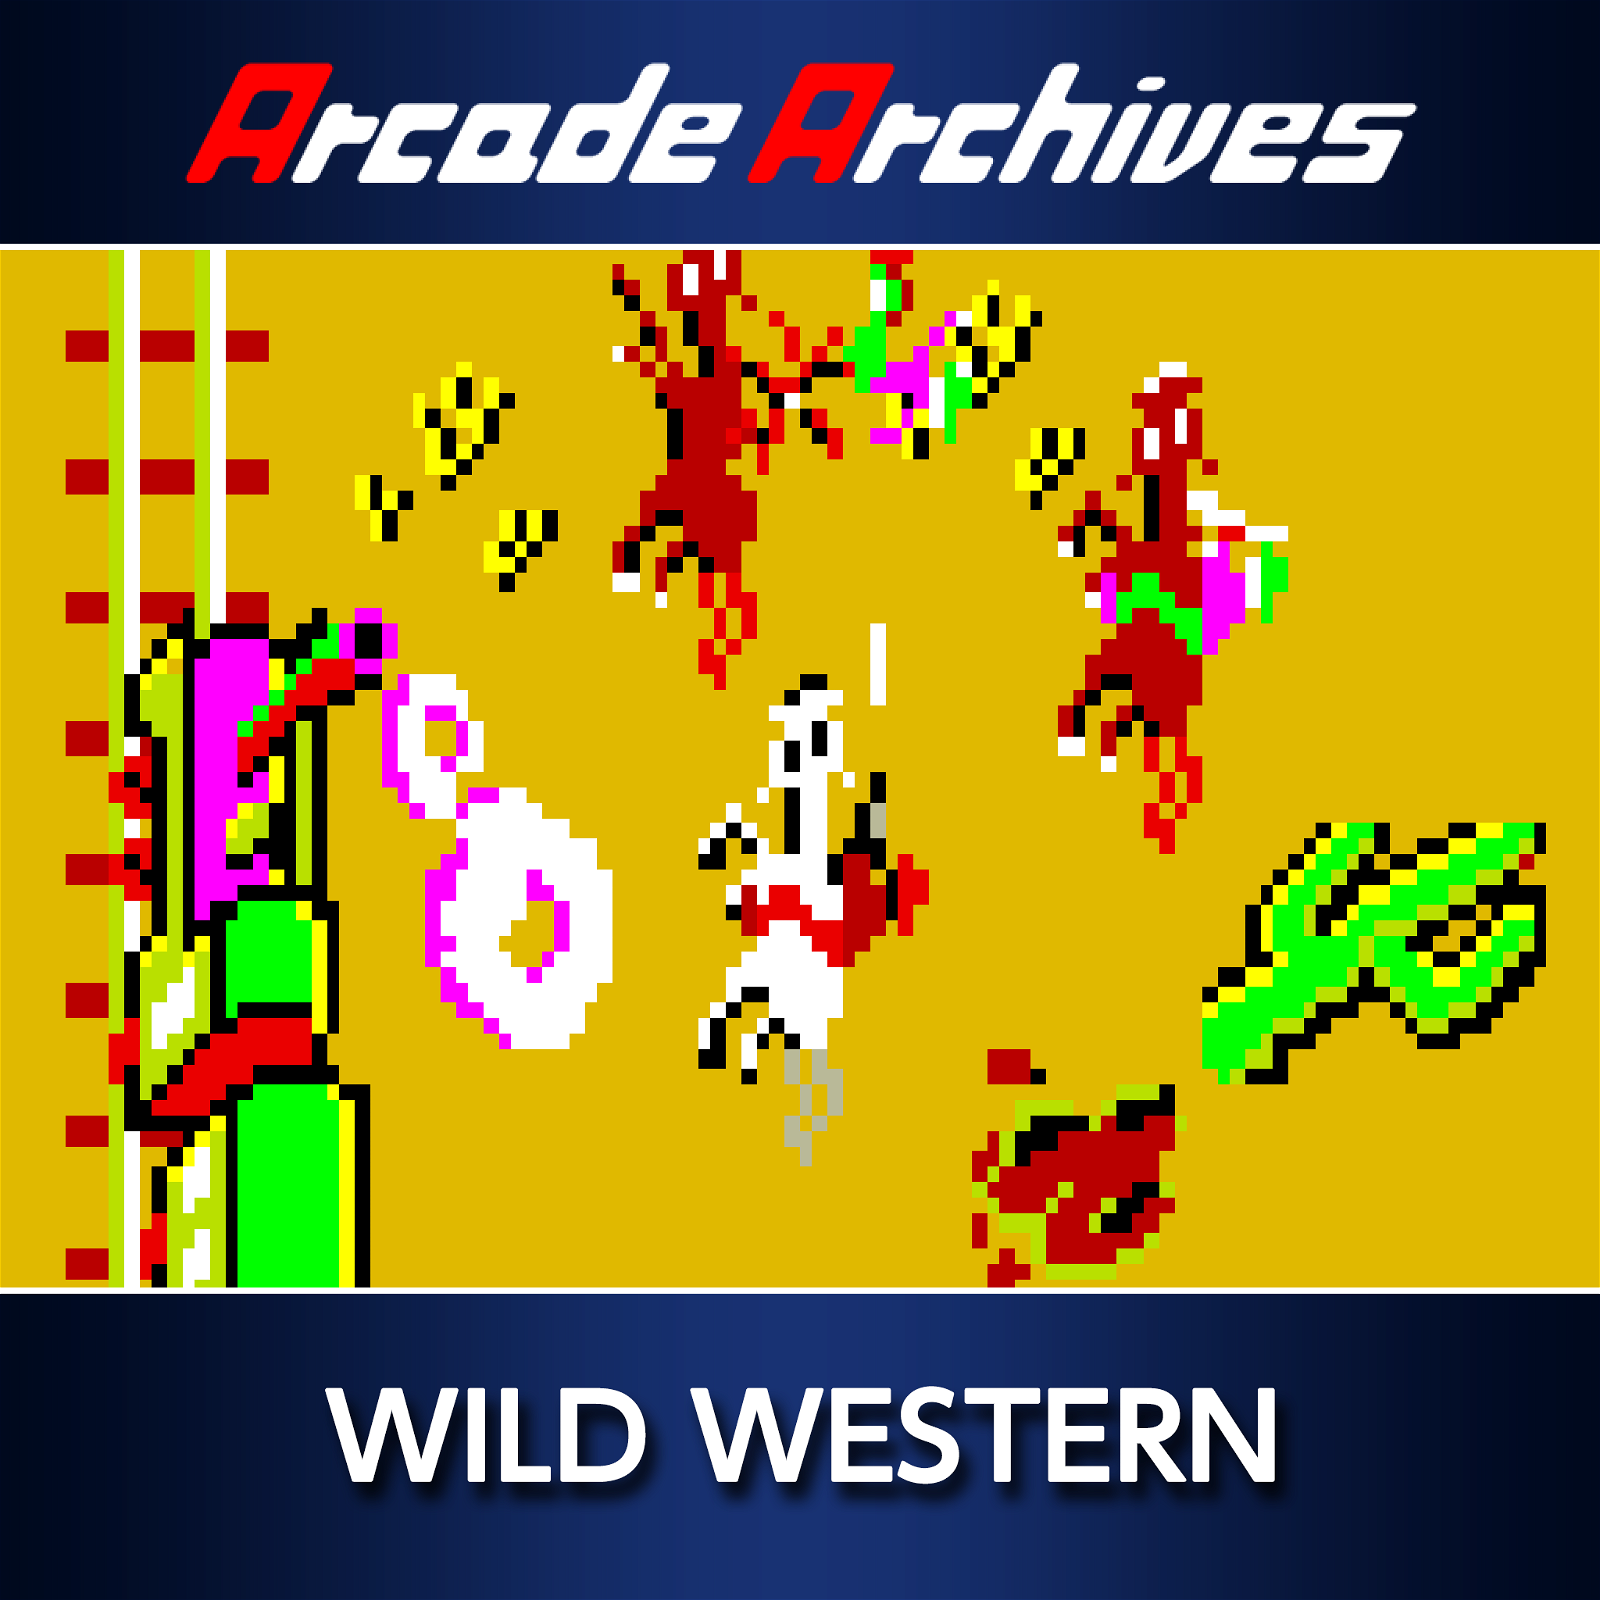 Image of Arcade Archives WILD WESTERN